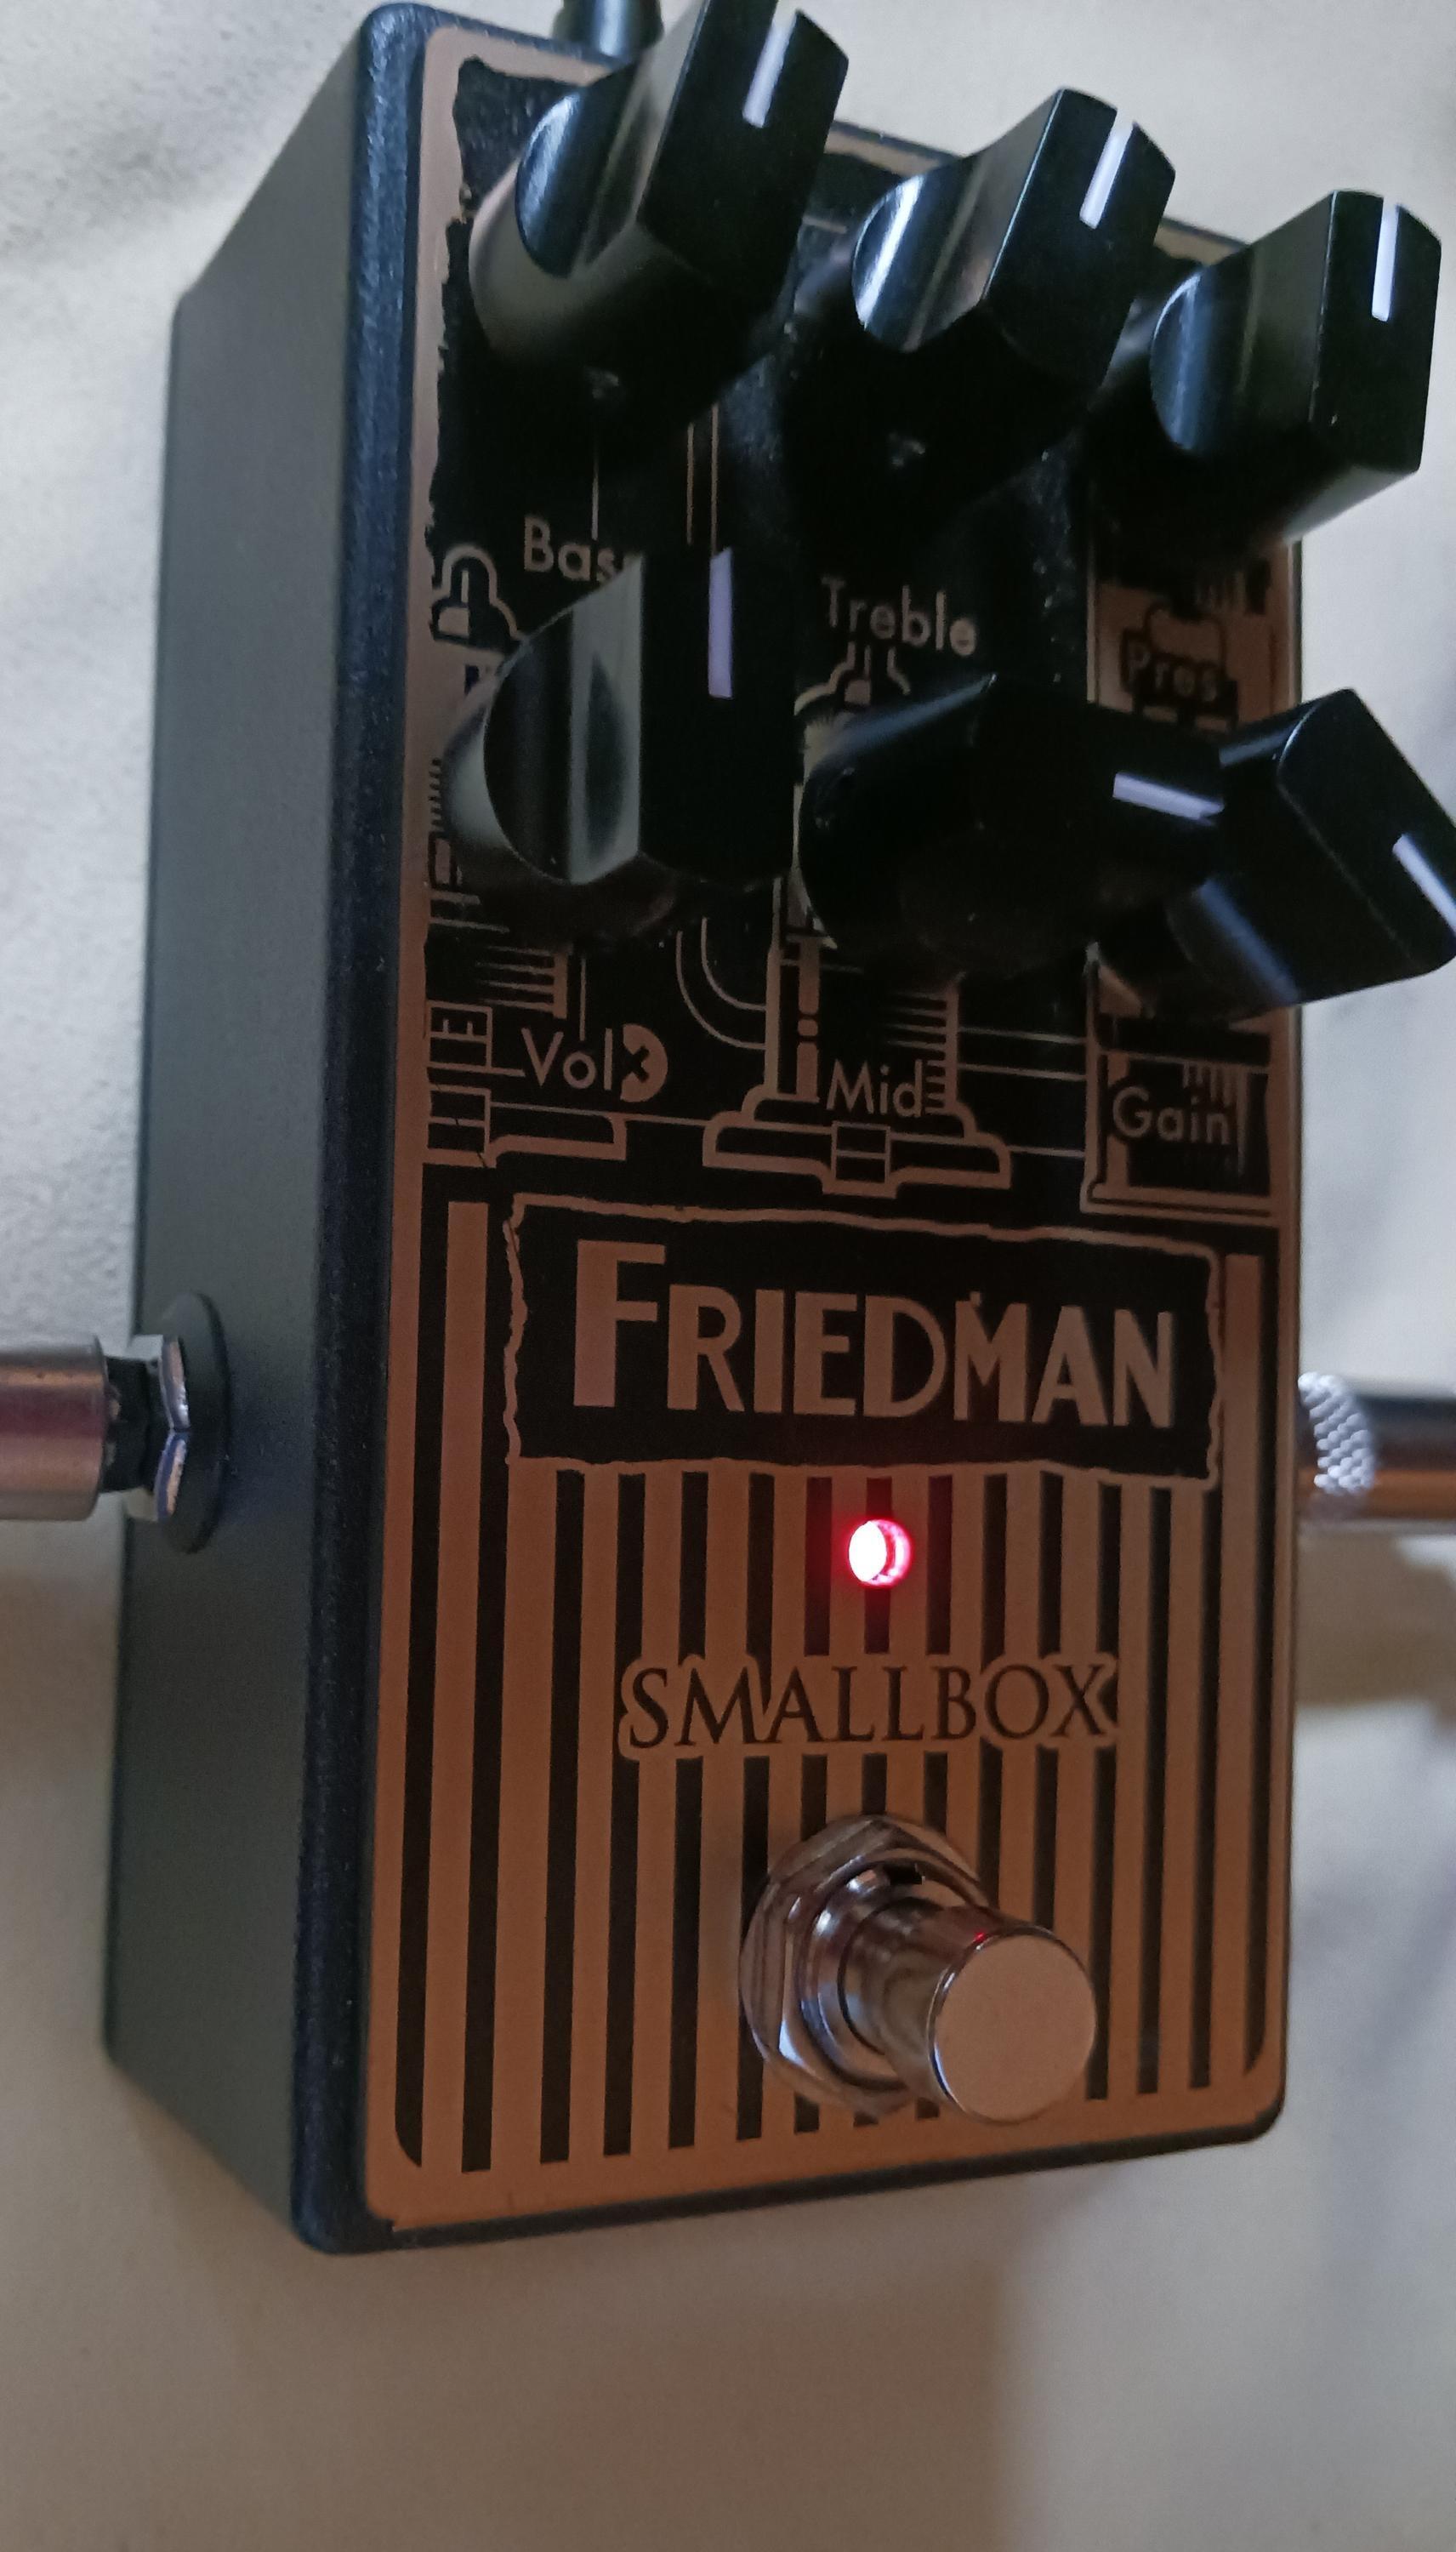 Used Friedman Small Box Distortion Pedal - Sweetwater's Gear Exchange